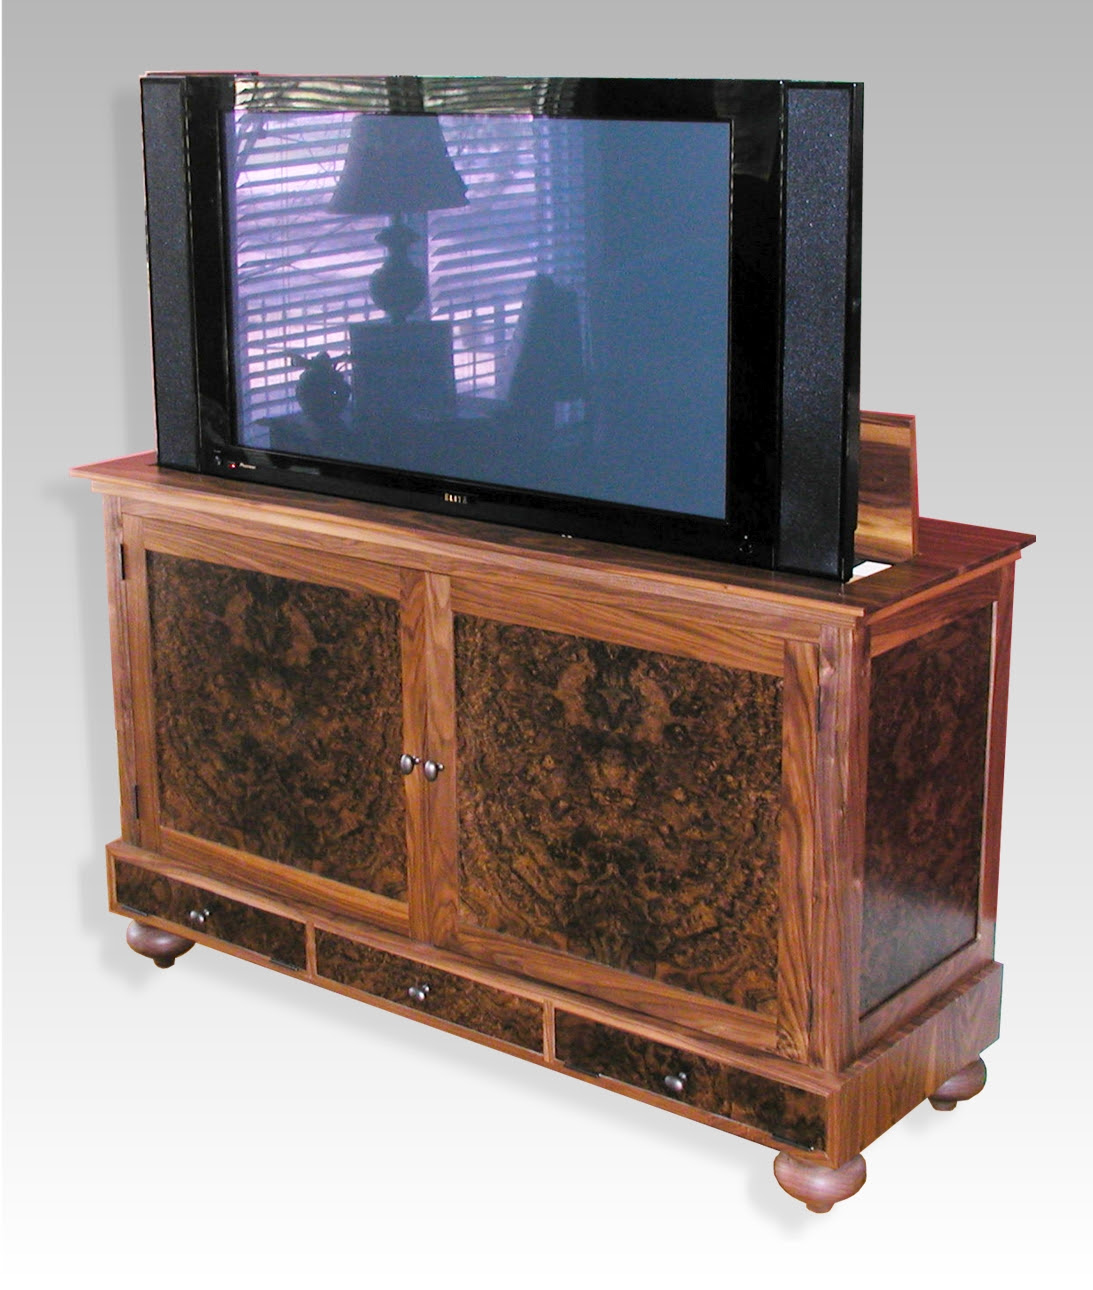 Here's a design you can make yourself. Plasma Tv Lift Cabinet By Rj Fine Woodworking